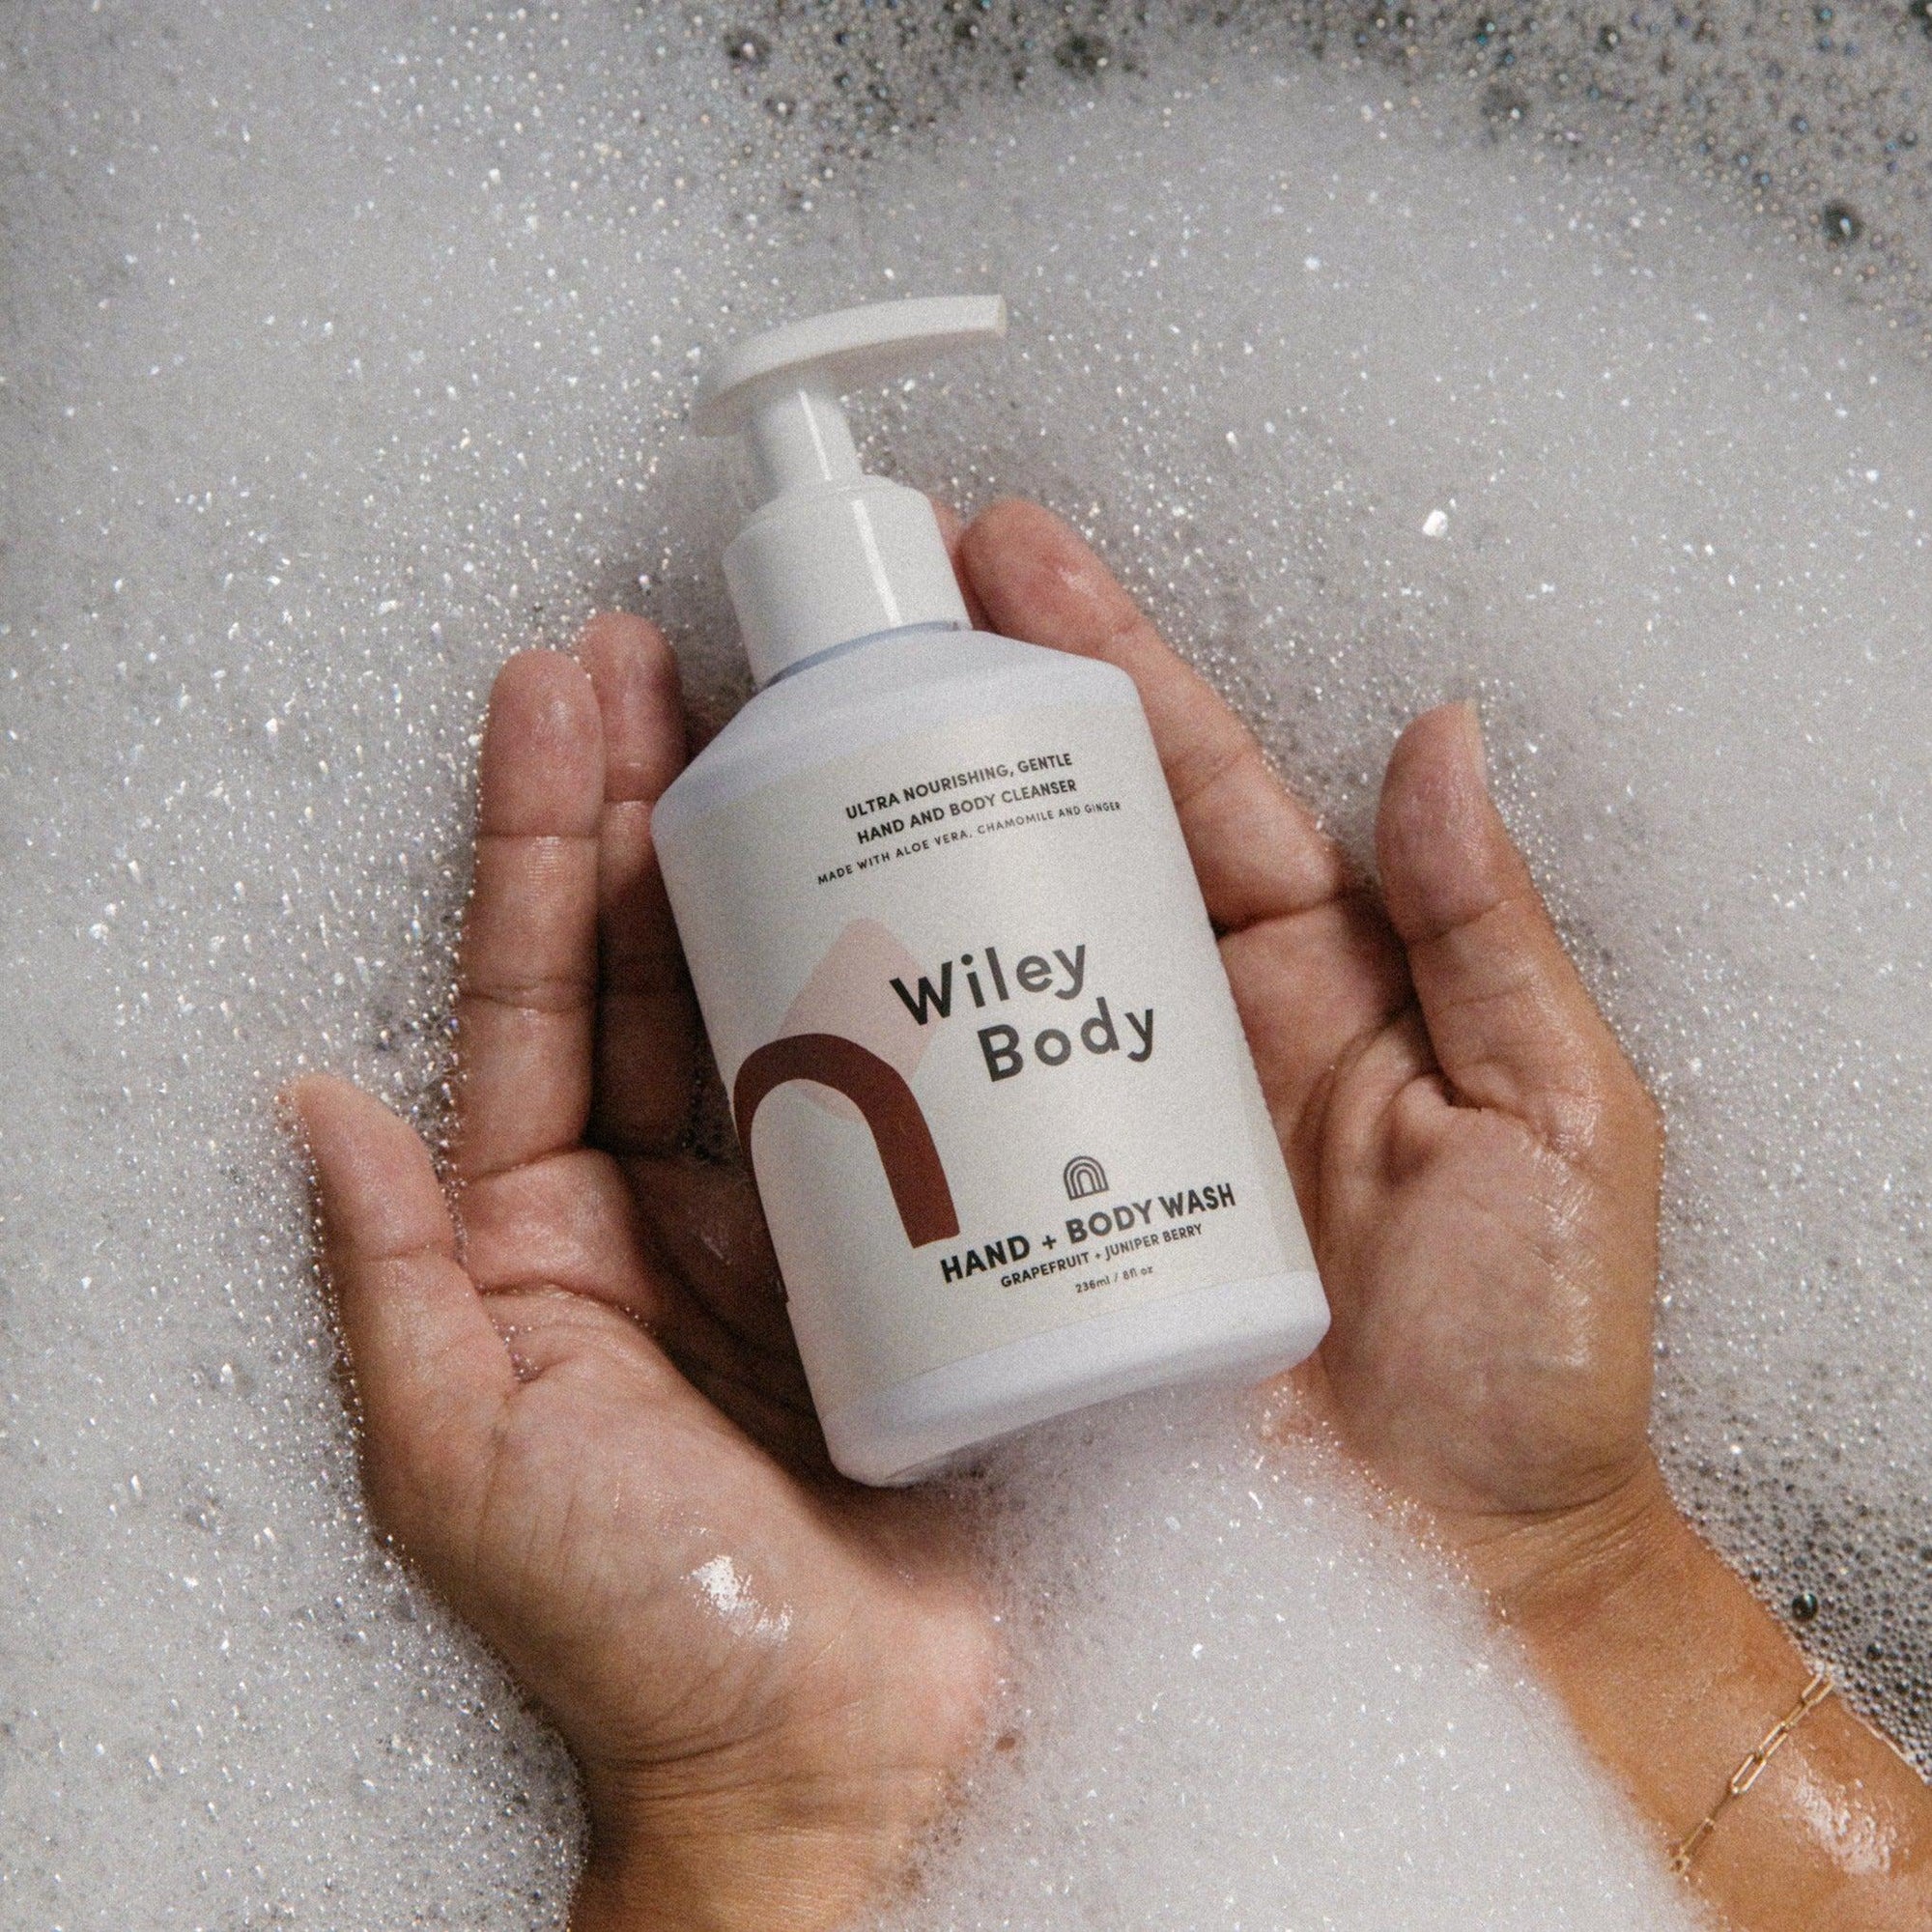 A person holding a bottle of Wiley Body hand & body wash.